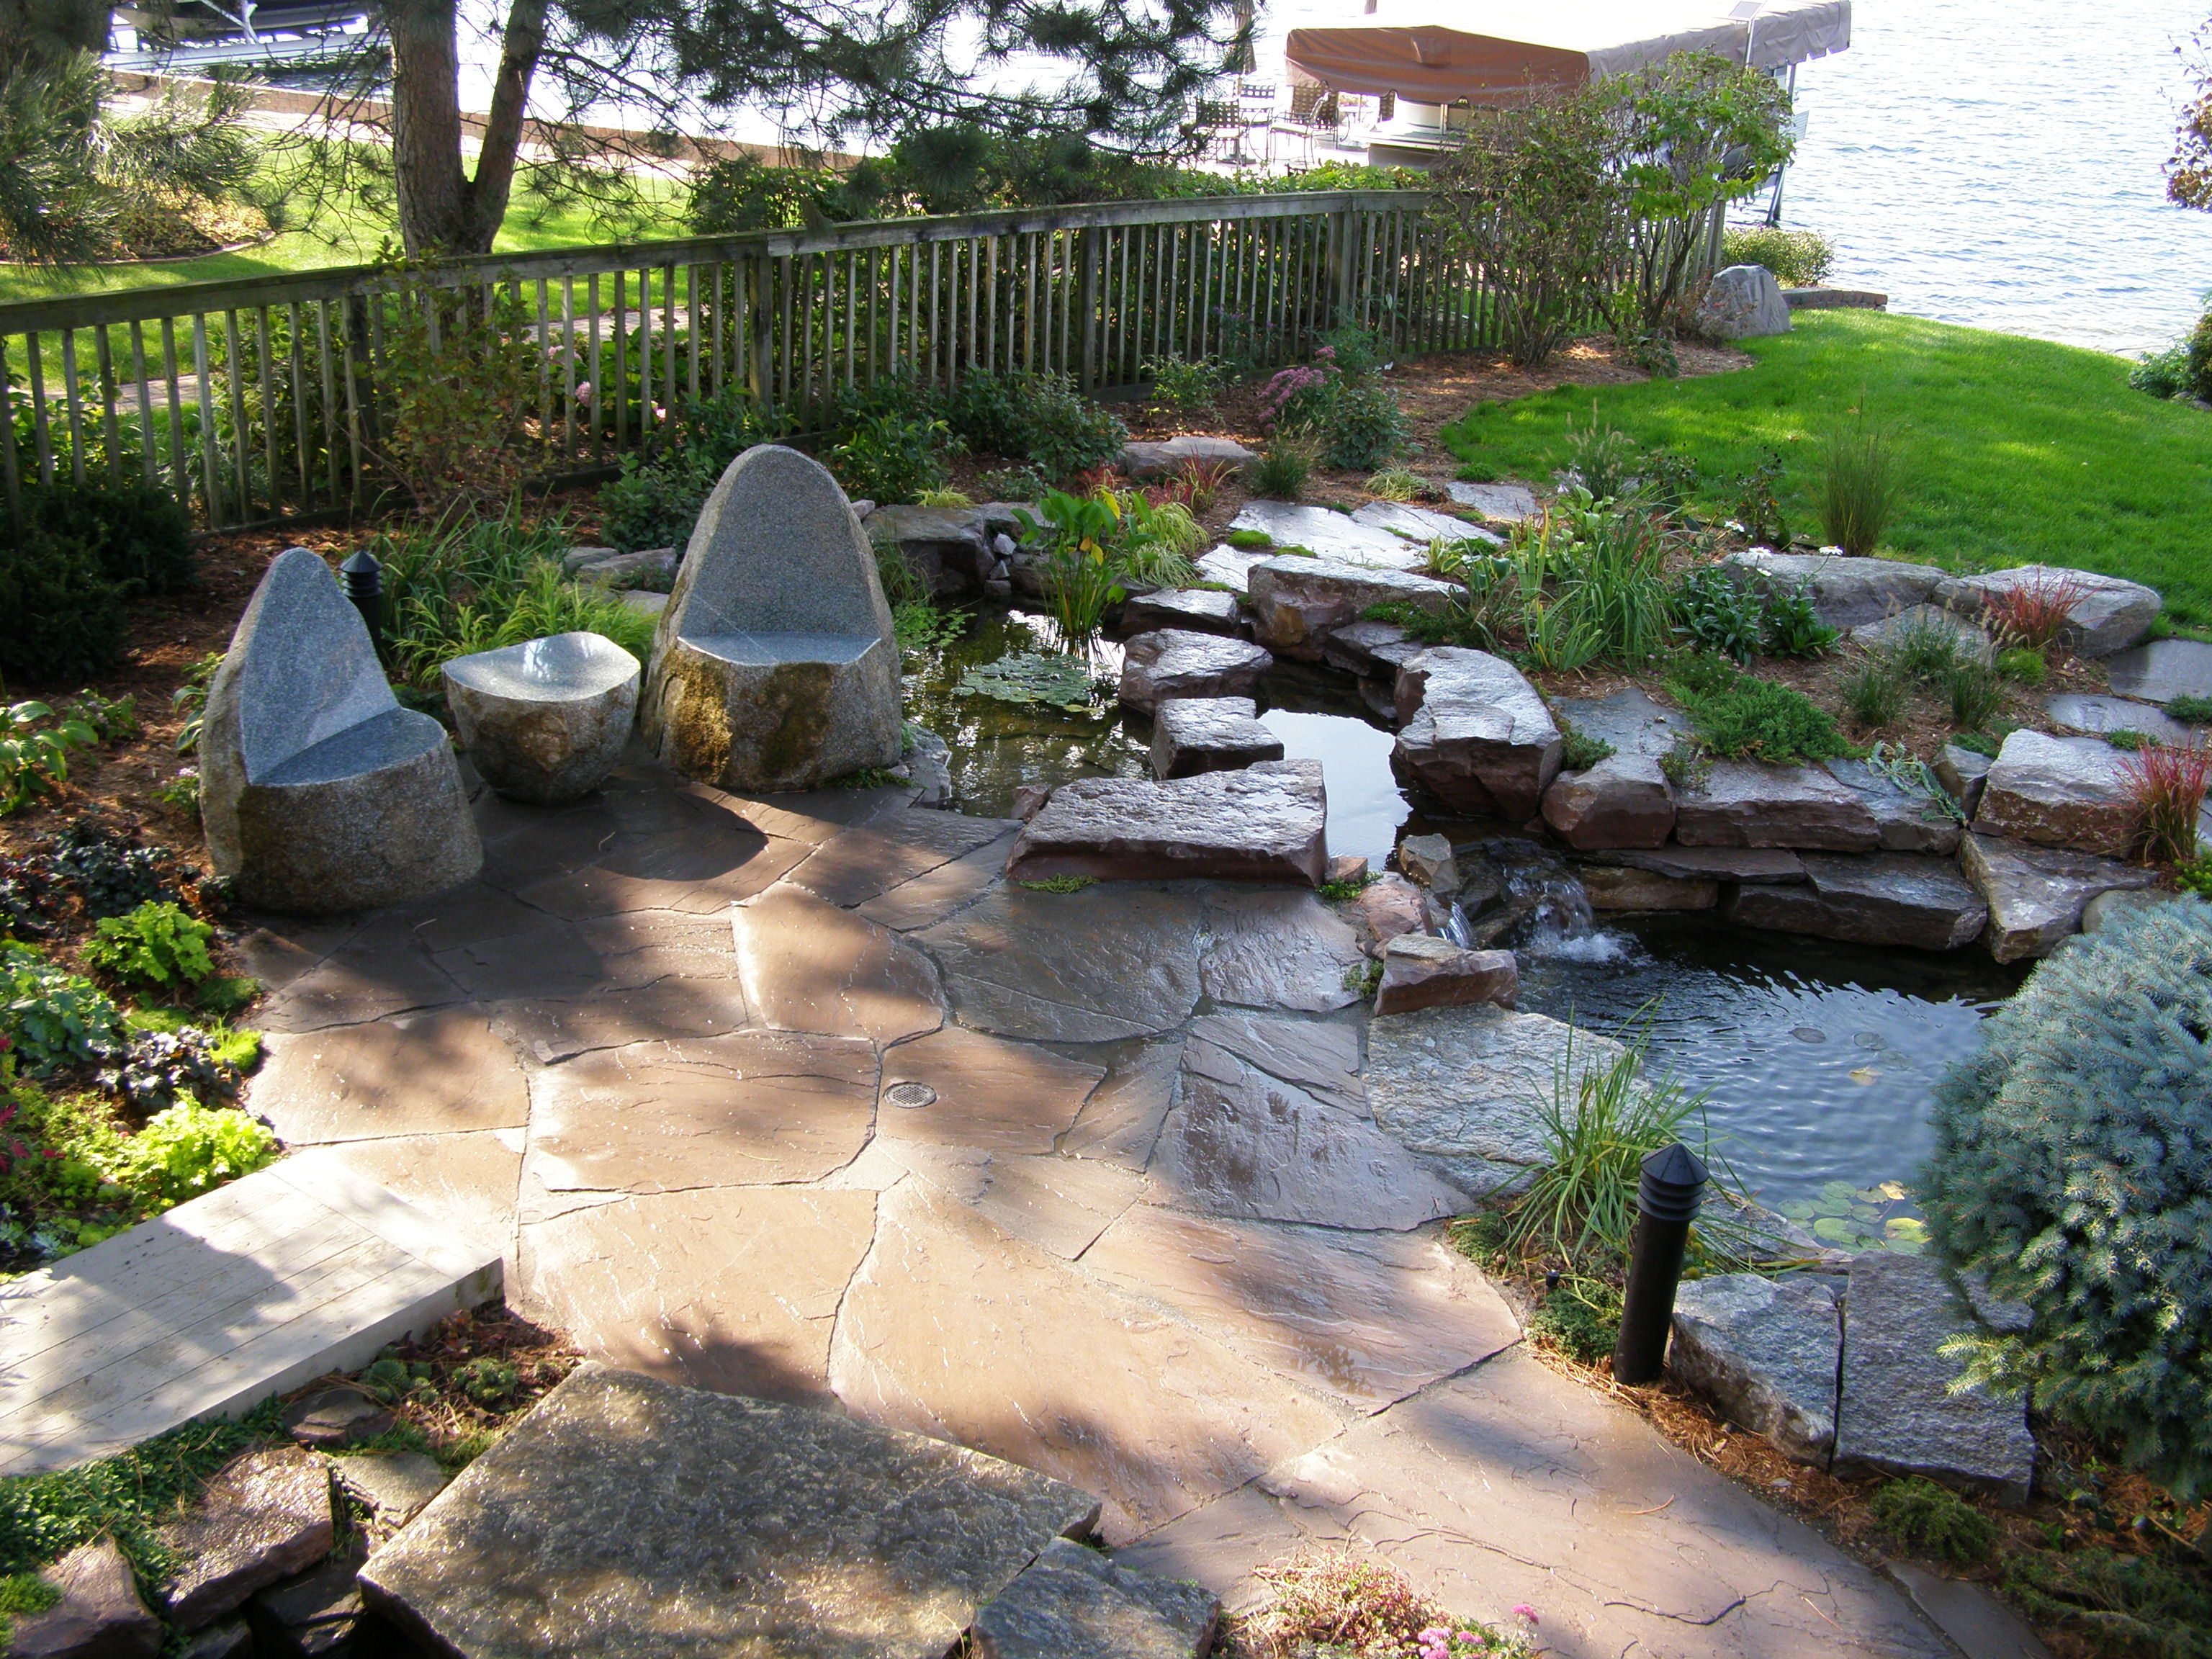 built this flagstone patio in 2007: